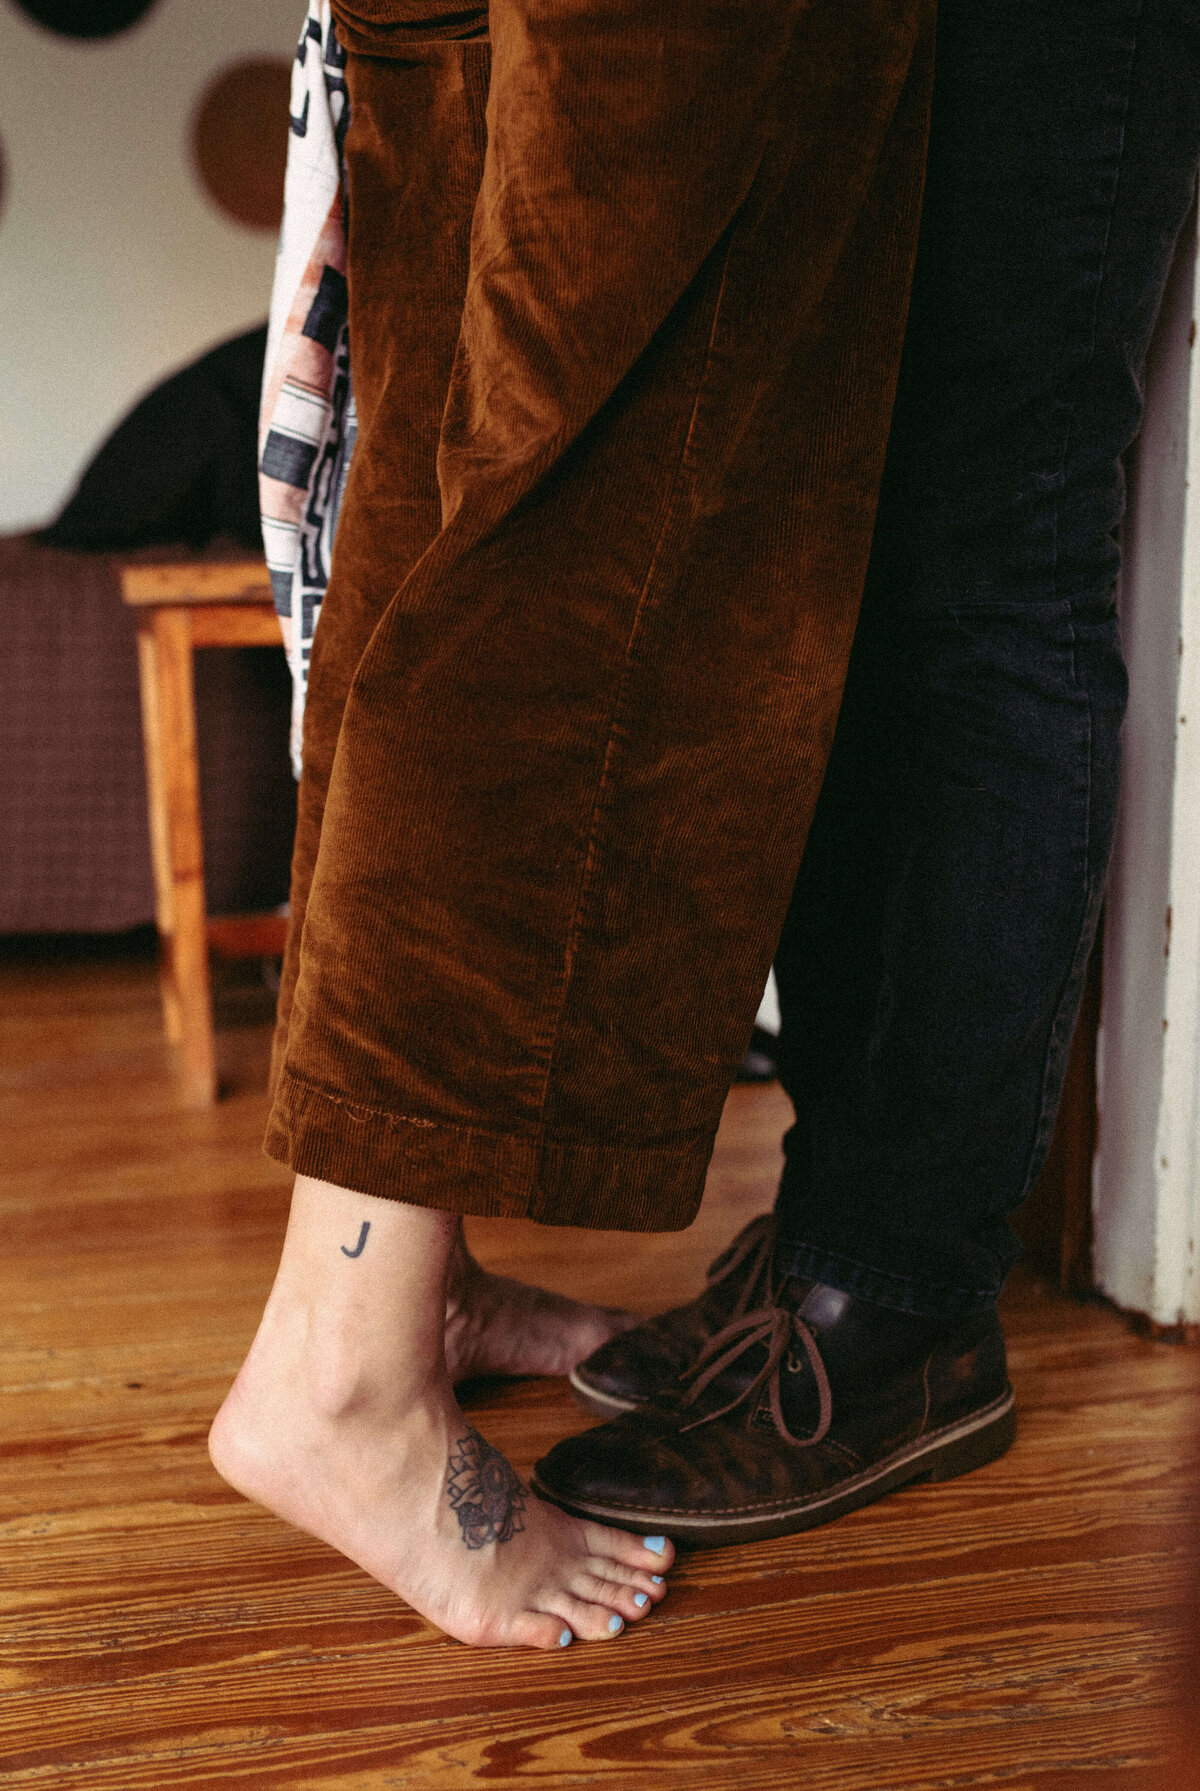 detail shot of couples shots & feet while kissing.  girl is on tiptoes